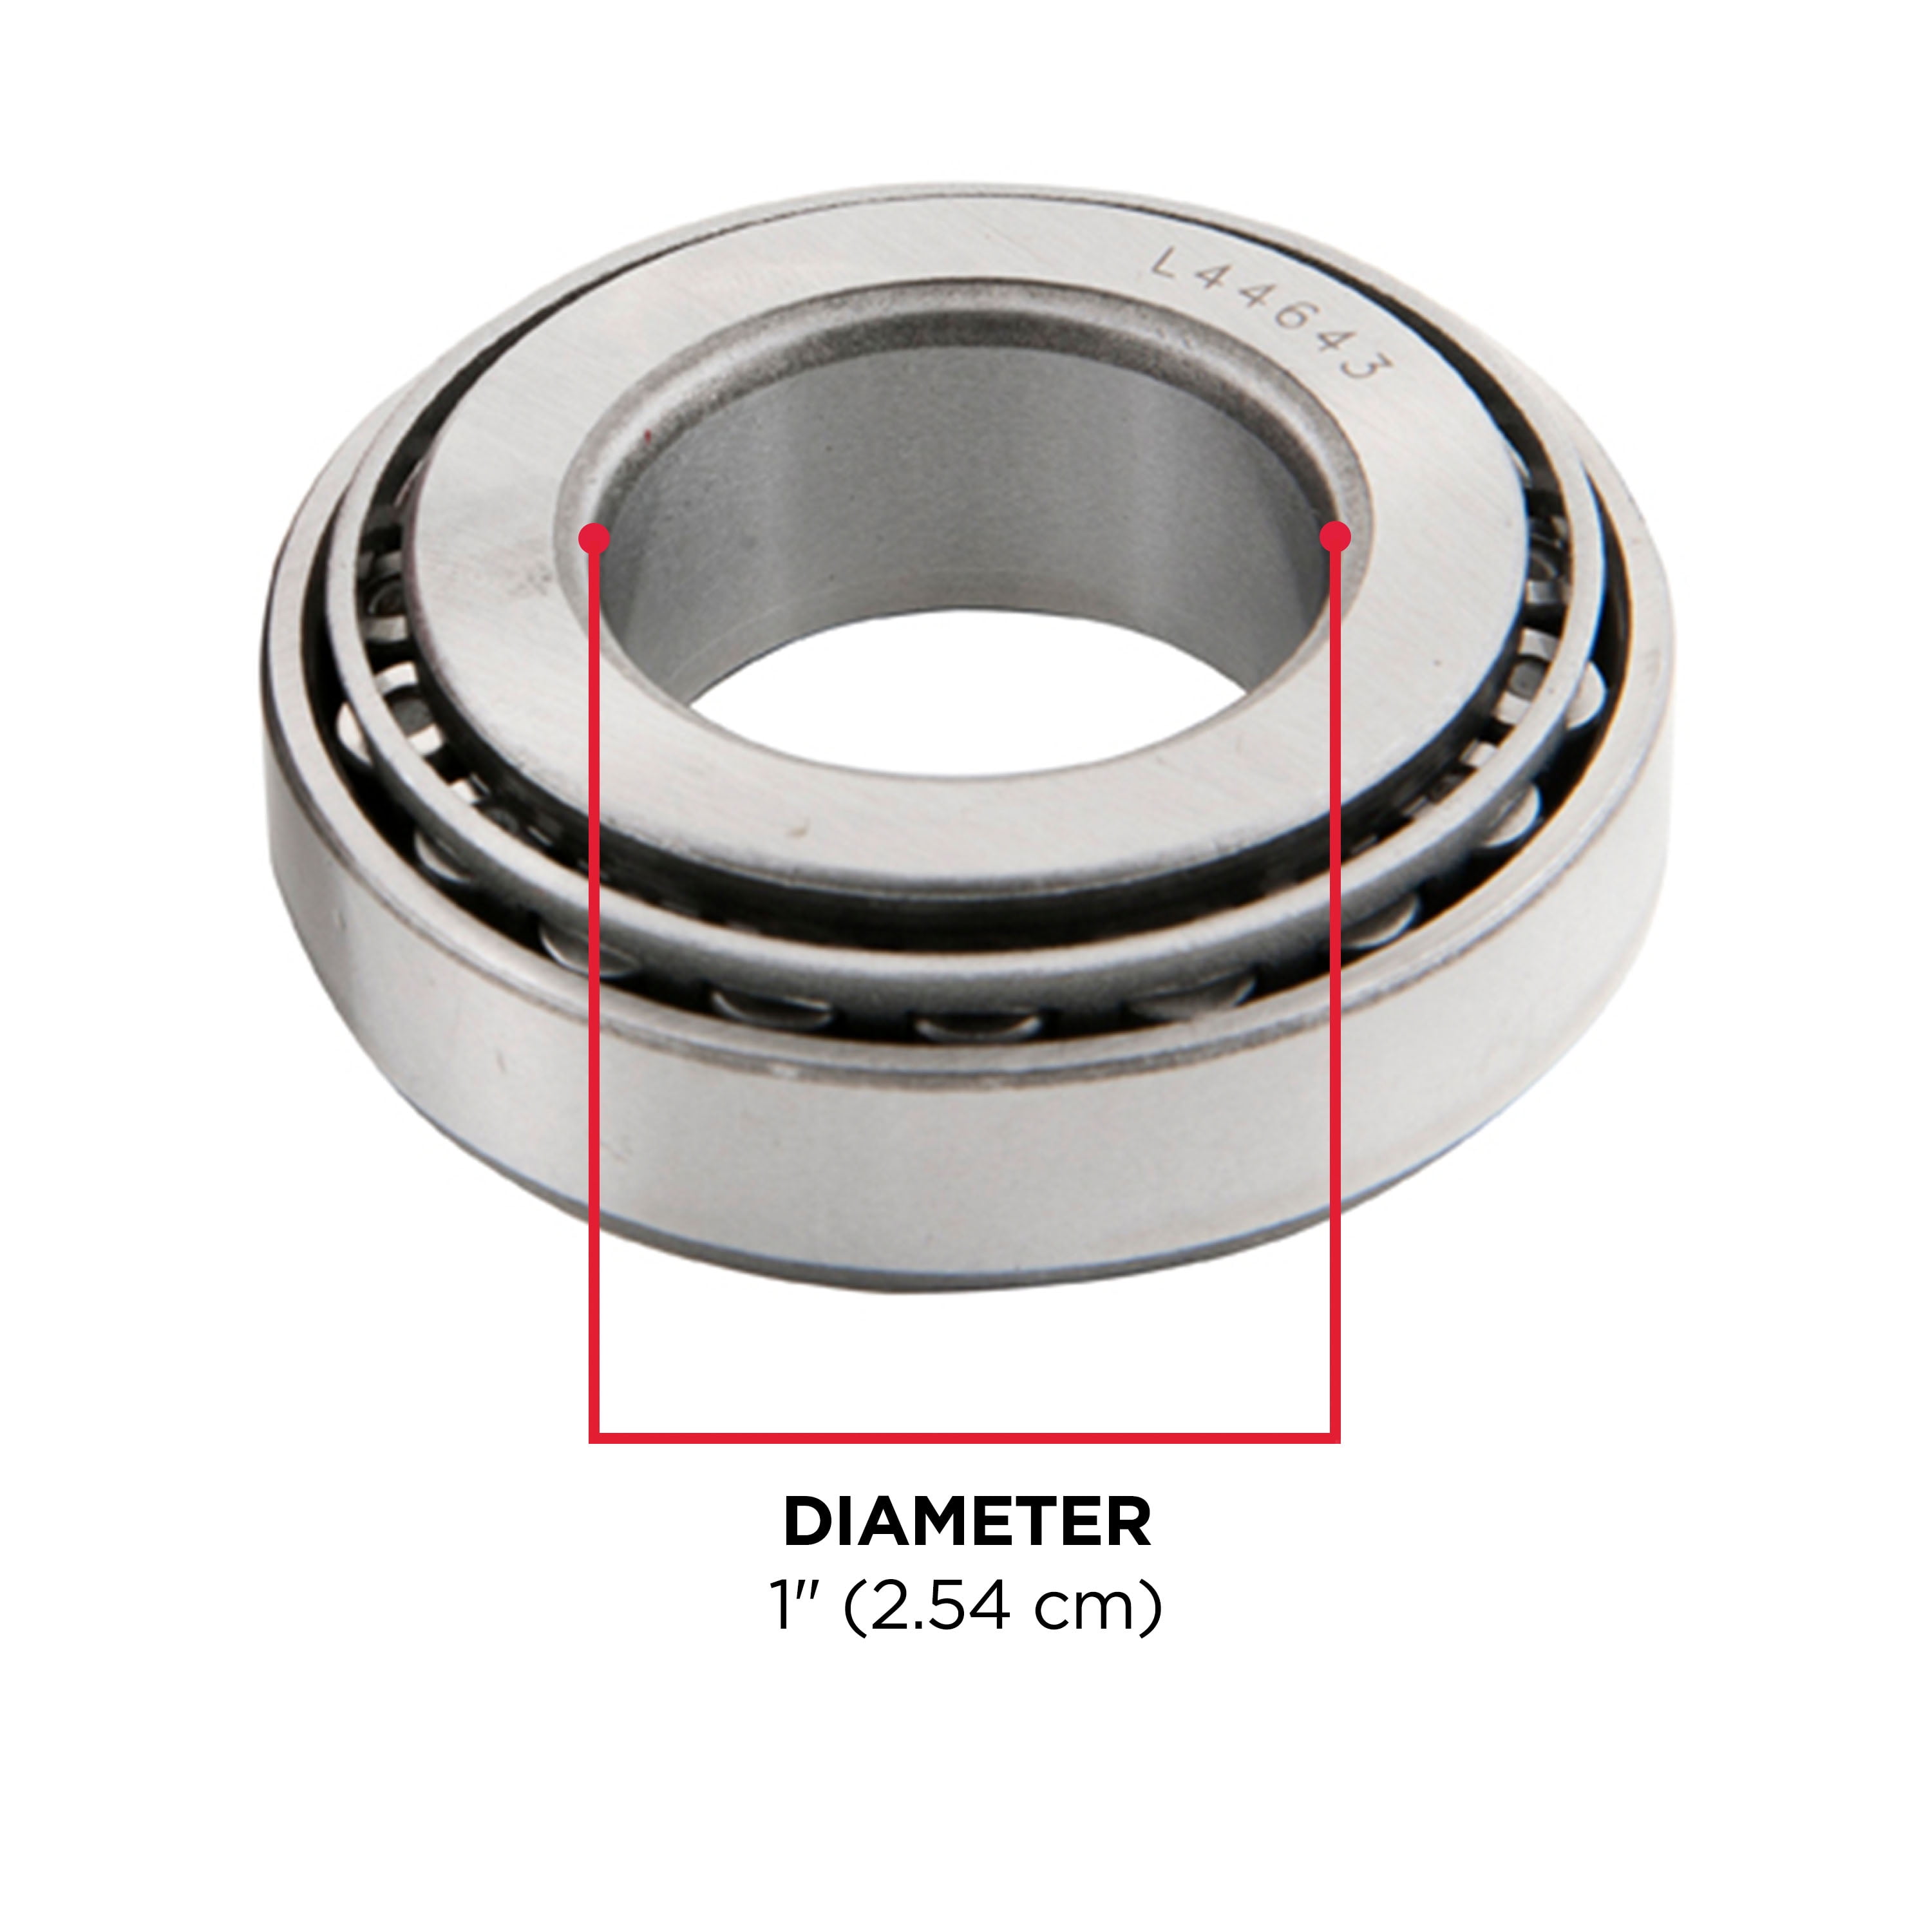 Roller Bearing Track Guide Bearing 1 pcs High Speed for Textile Machinery Electronic Equipment 